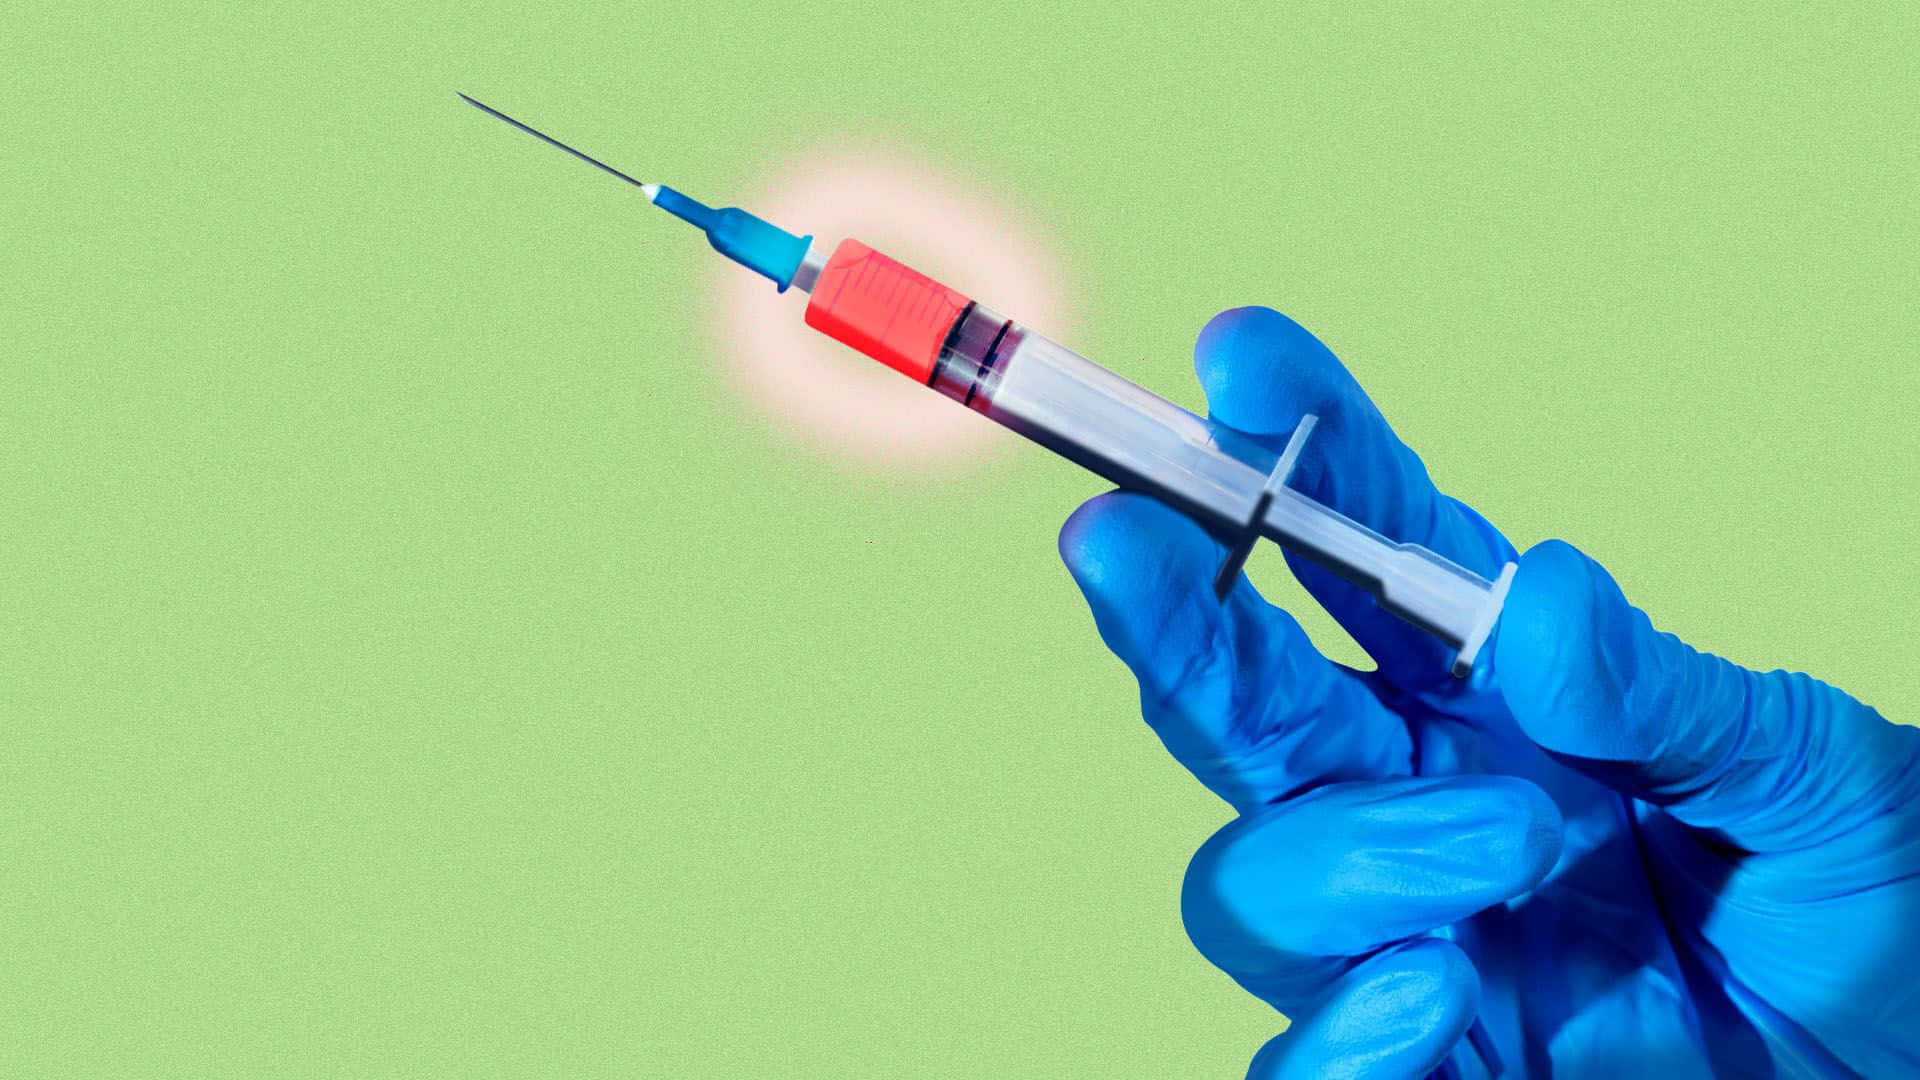 A hand holding a syringe and vaccine vial against a bright background.